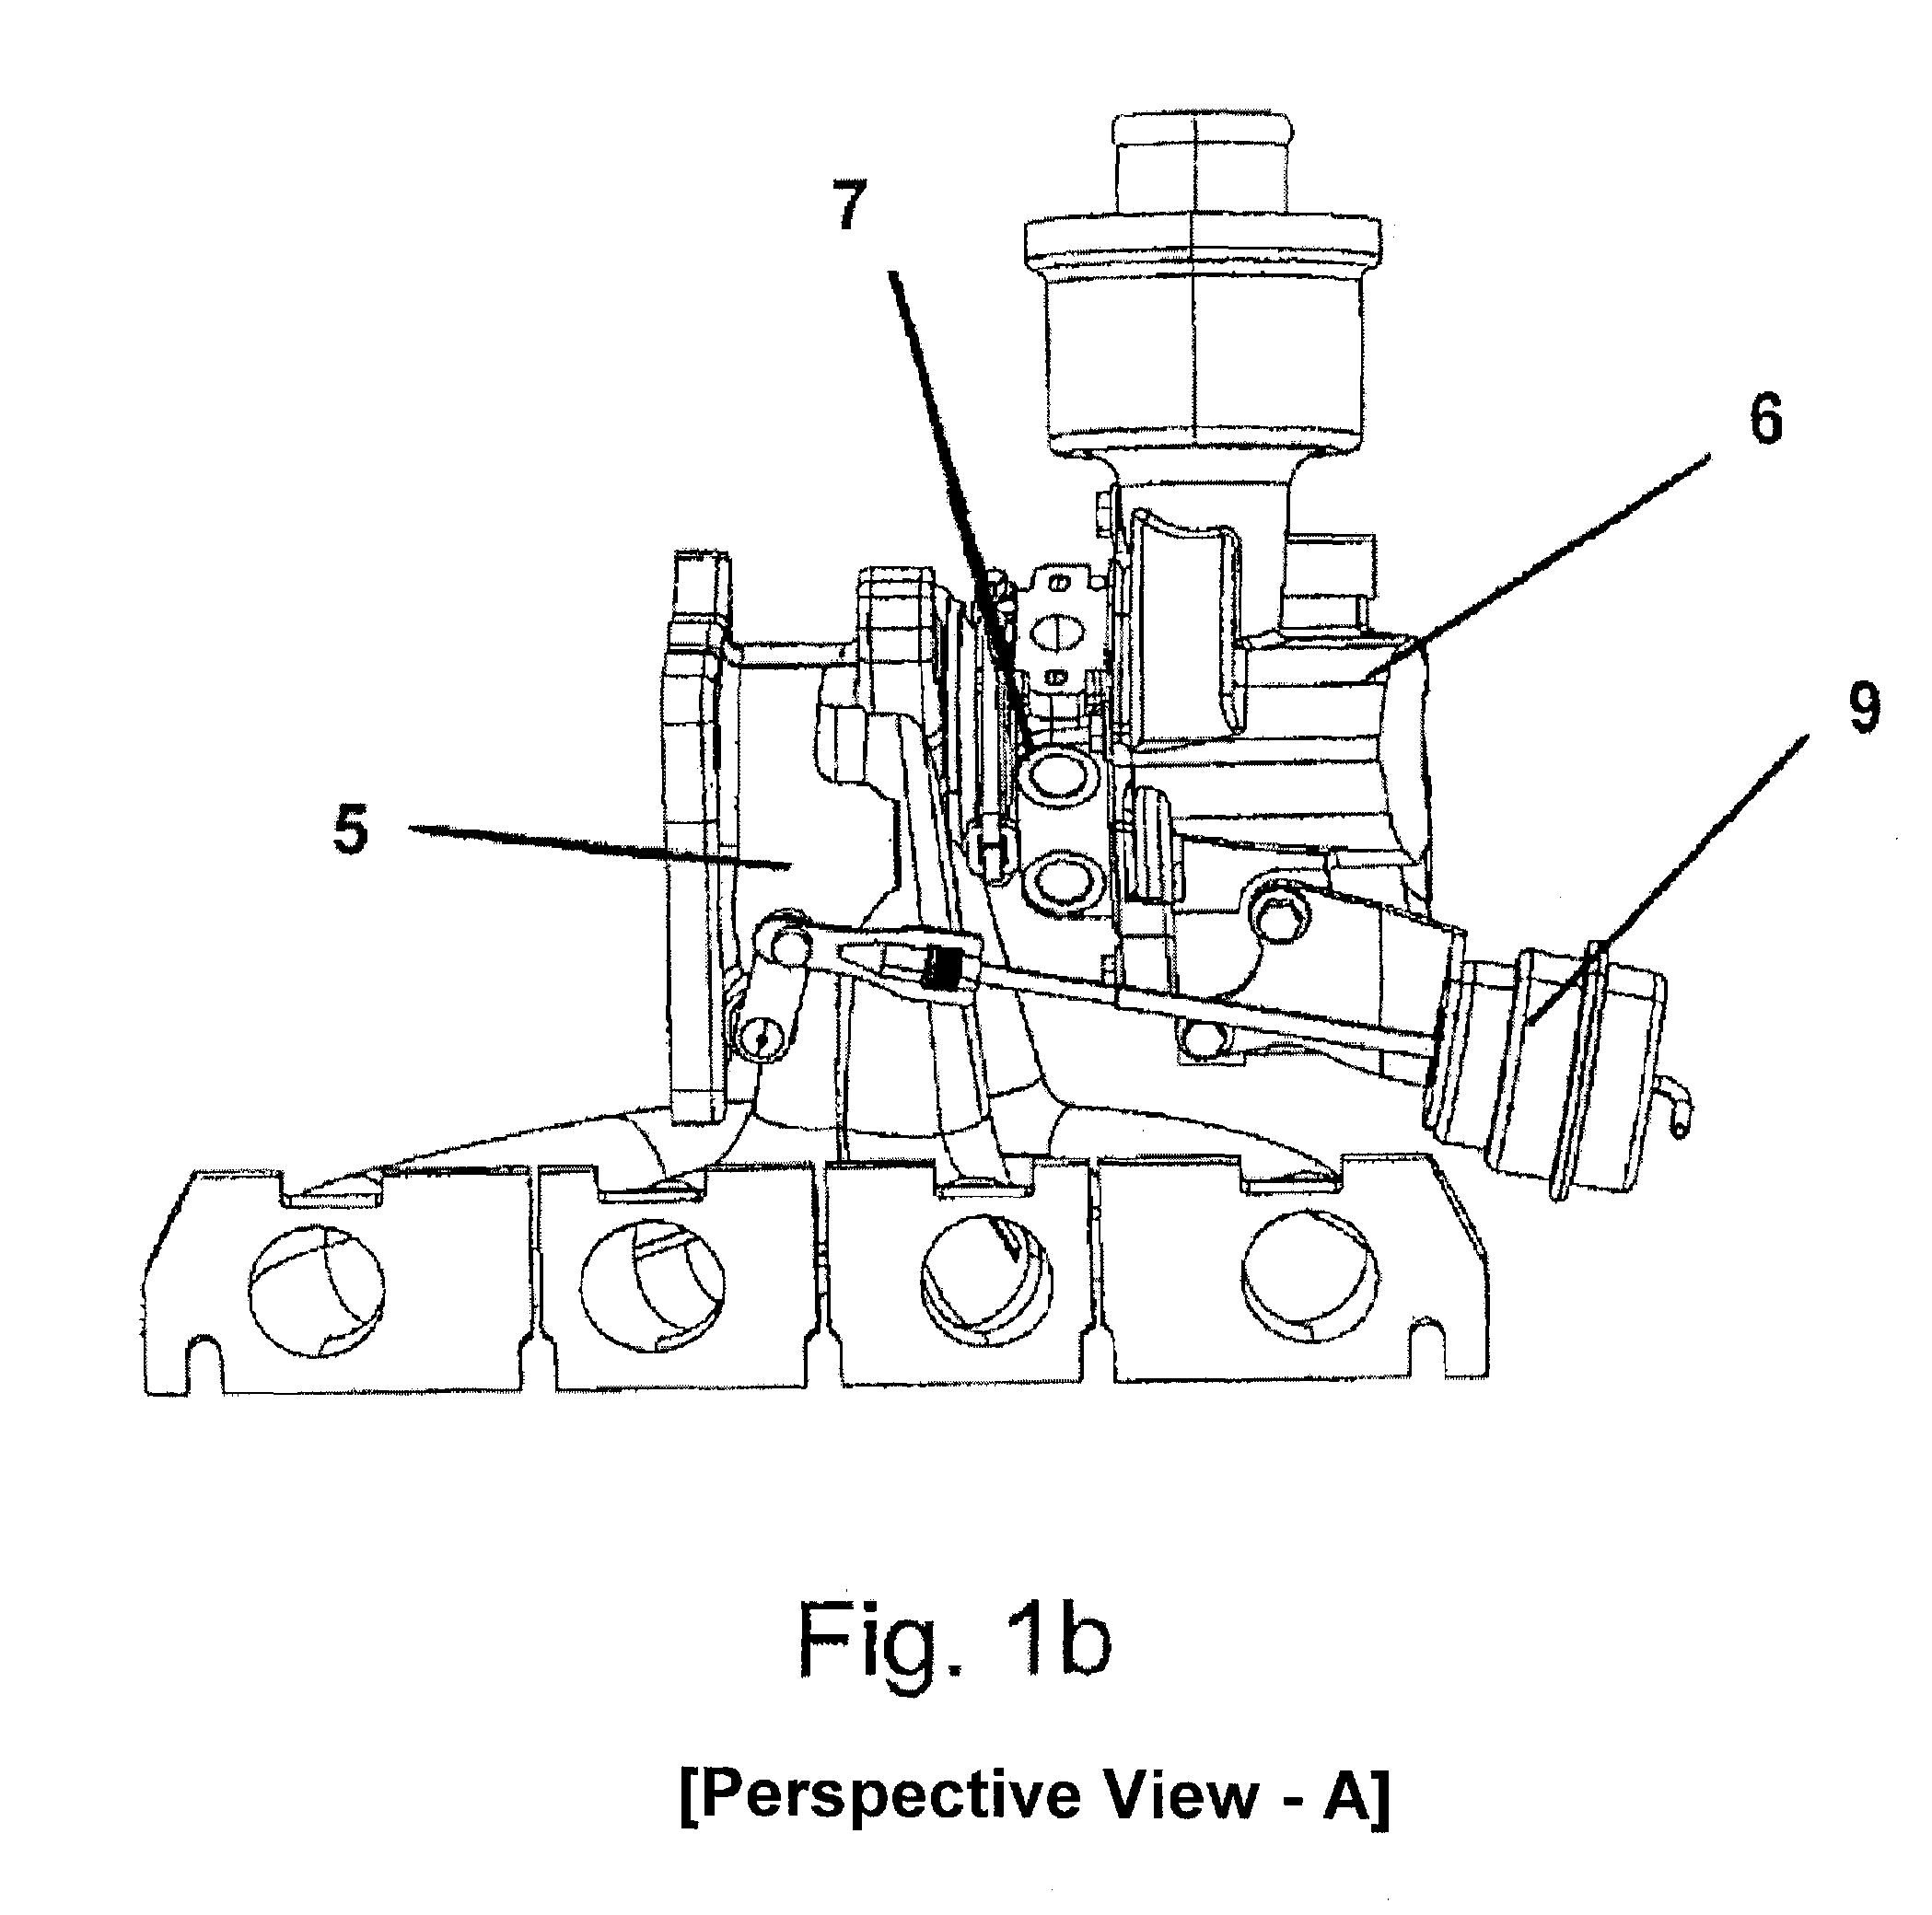 TurboCharger with an electric motor